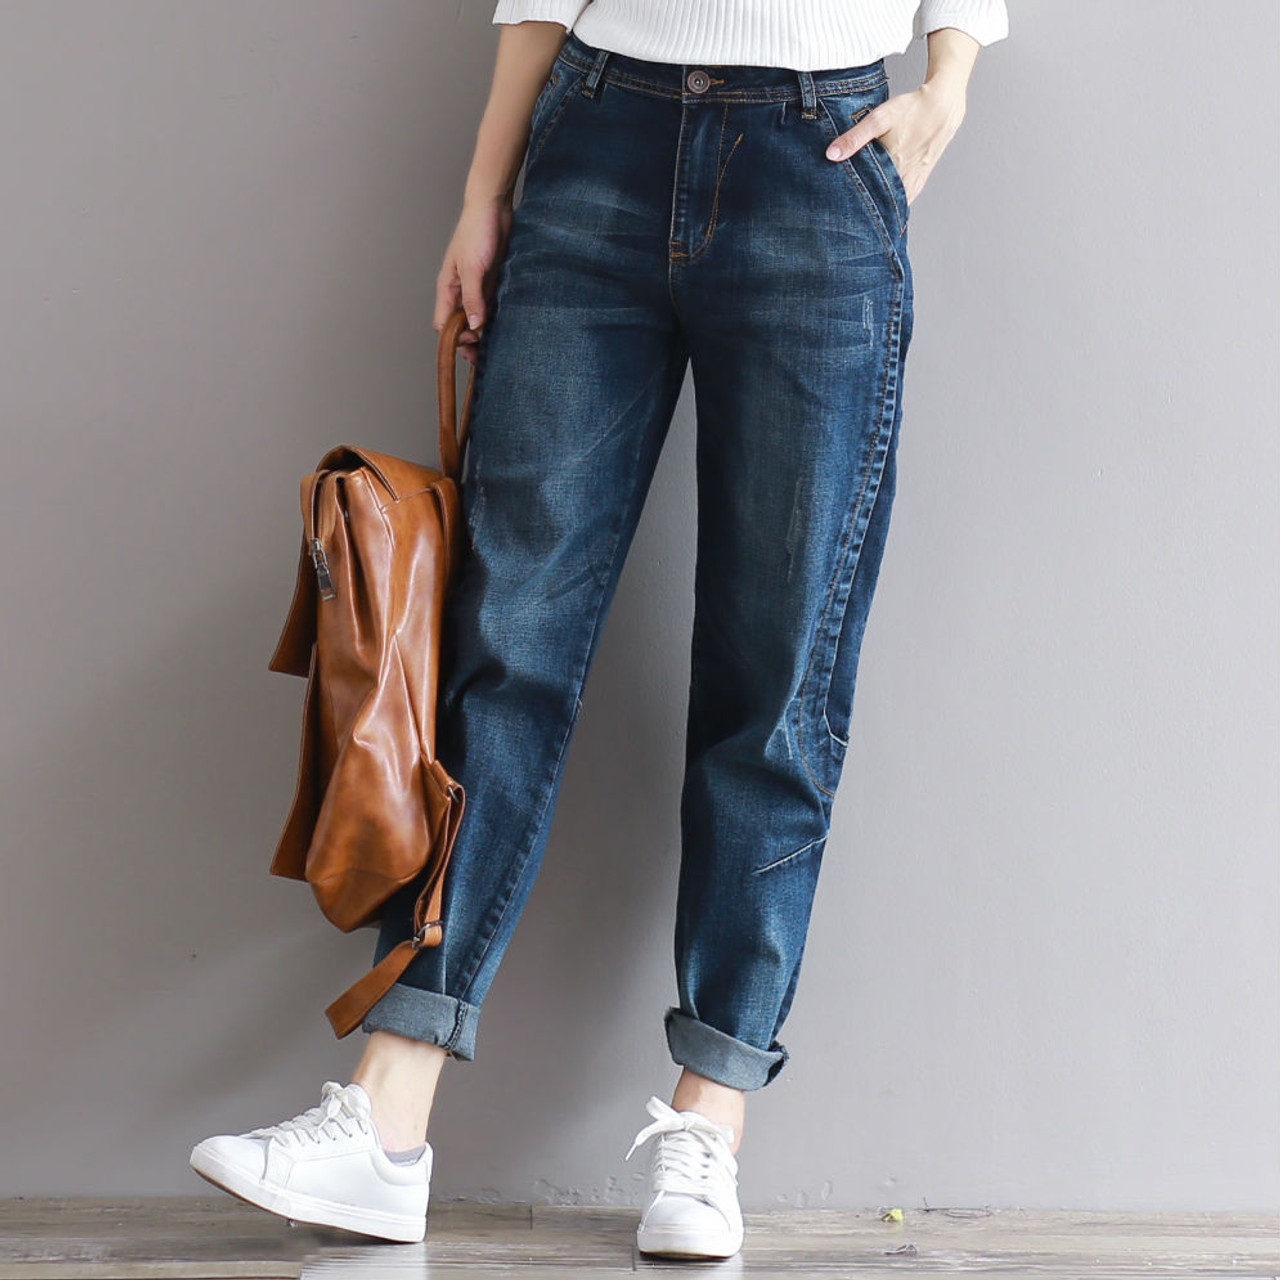 Aphrodite High Waisted Jeans for Women - Skinny India | Ubuy